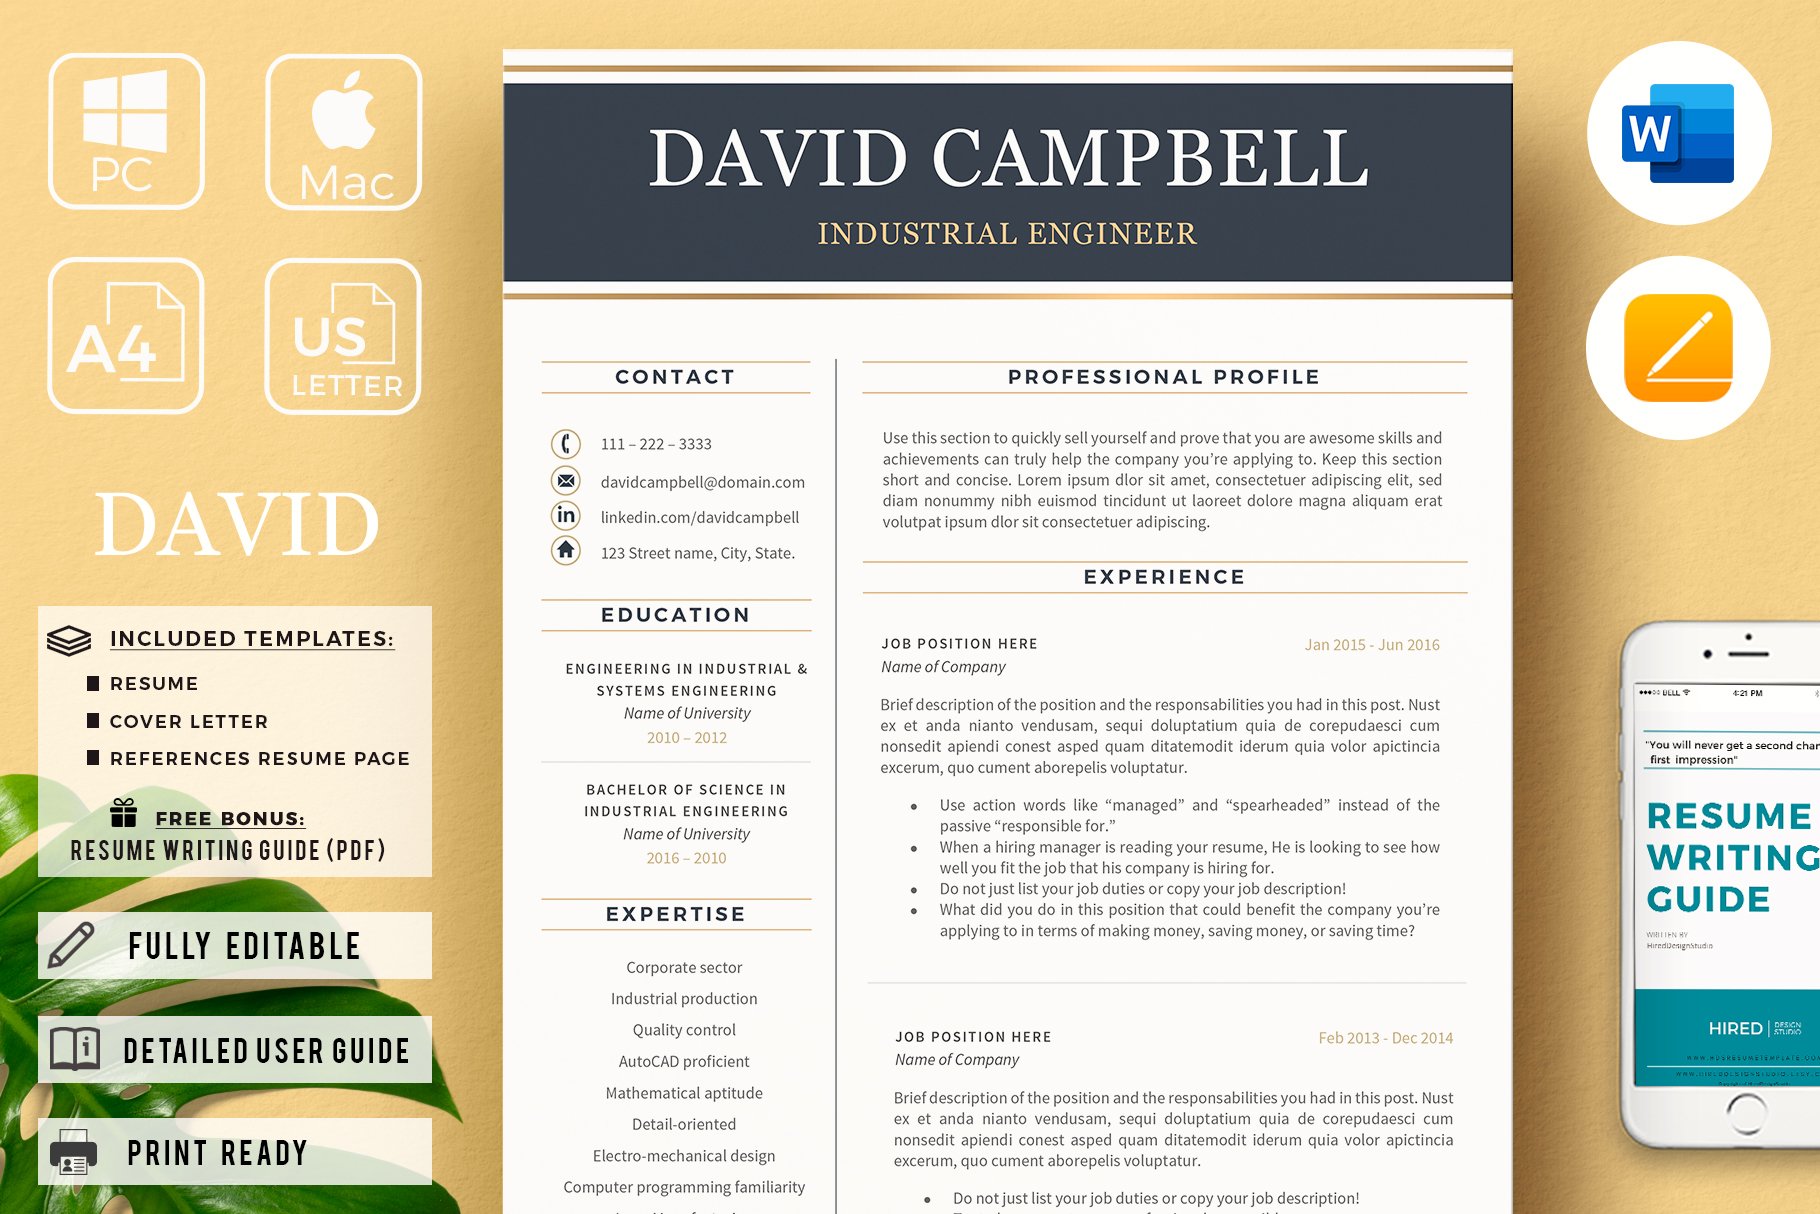 Resume for Engineer. Engineering CV cover image.